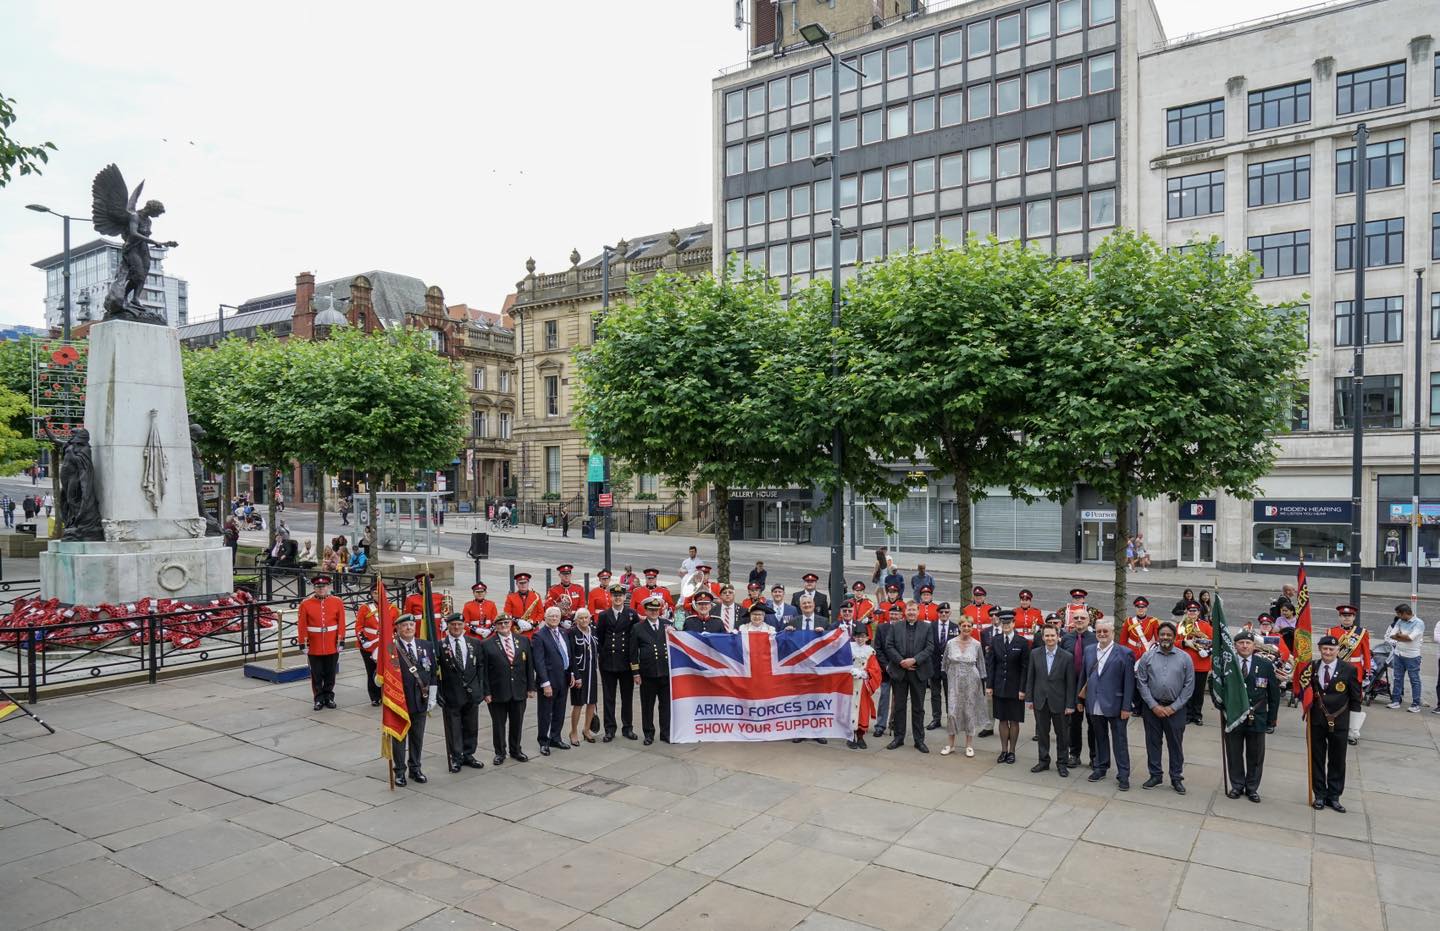 Leeds Armed Forces Day photo outside Leeds Town Hall area.